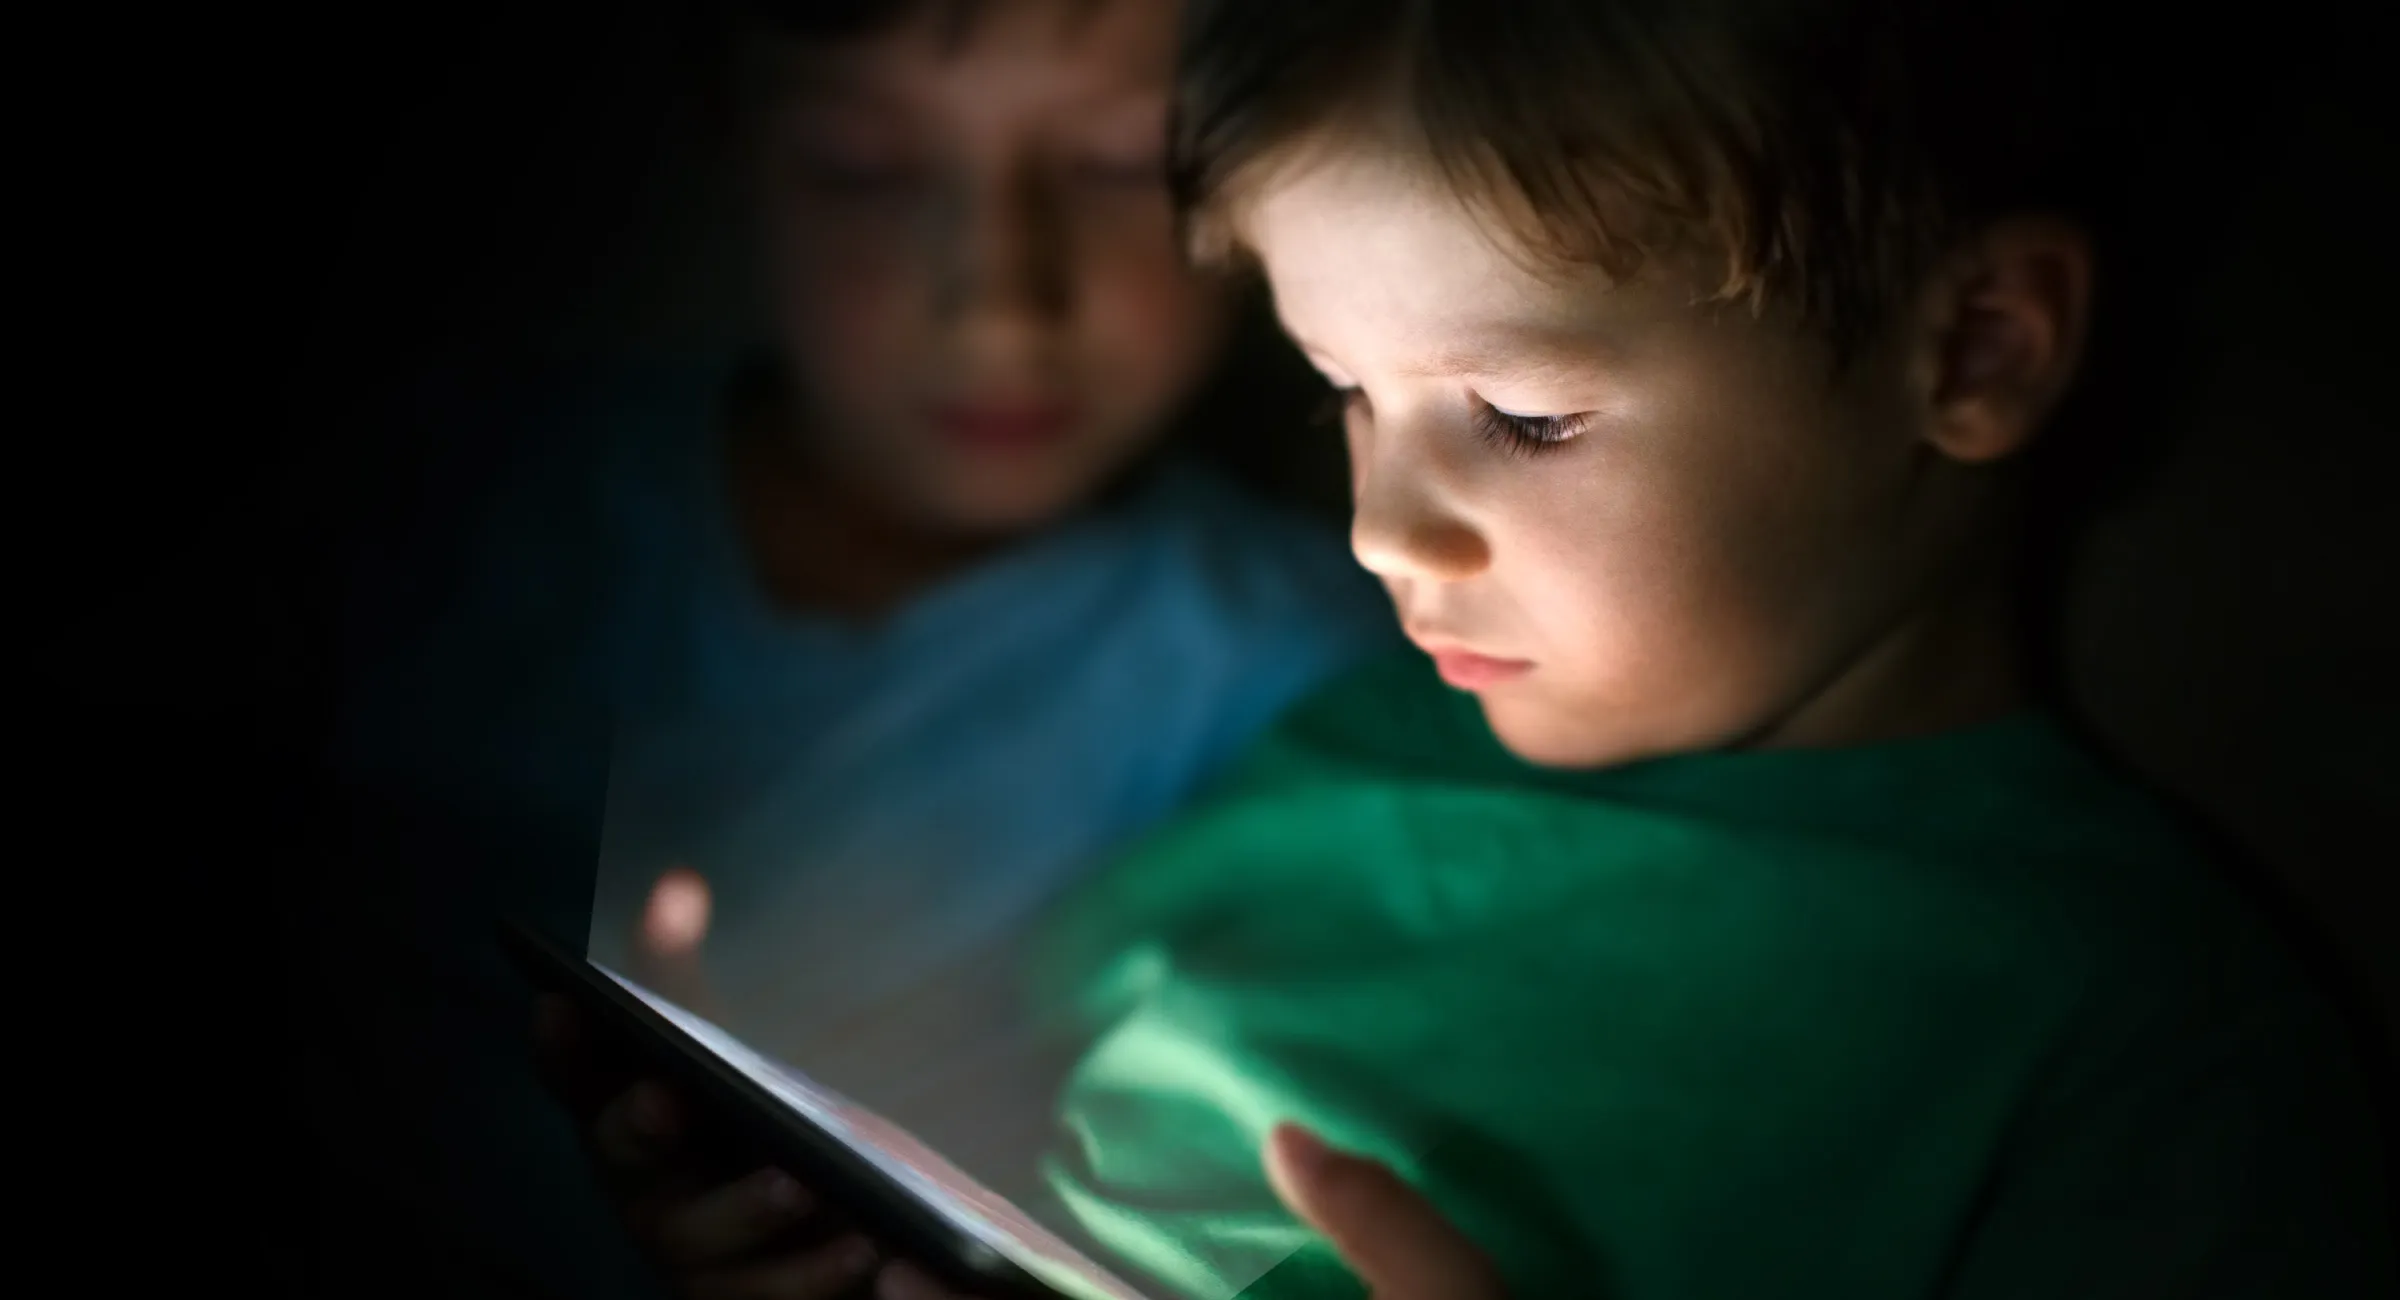 Kids, Privacy, and Apps